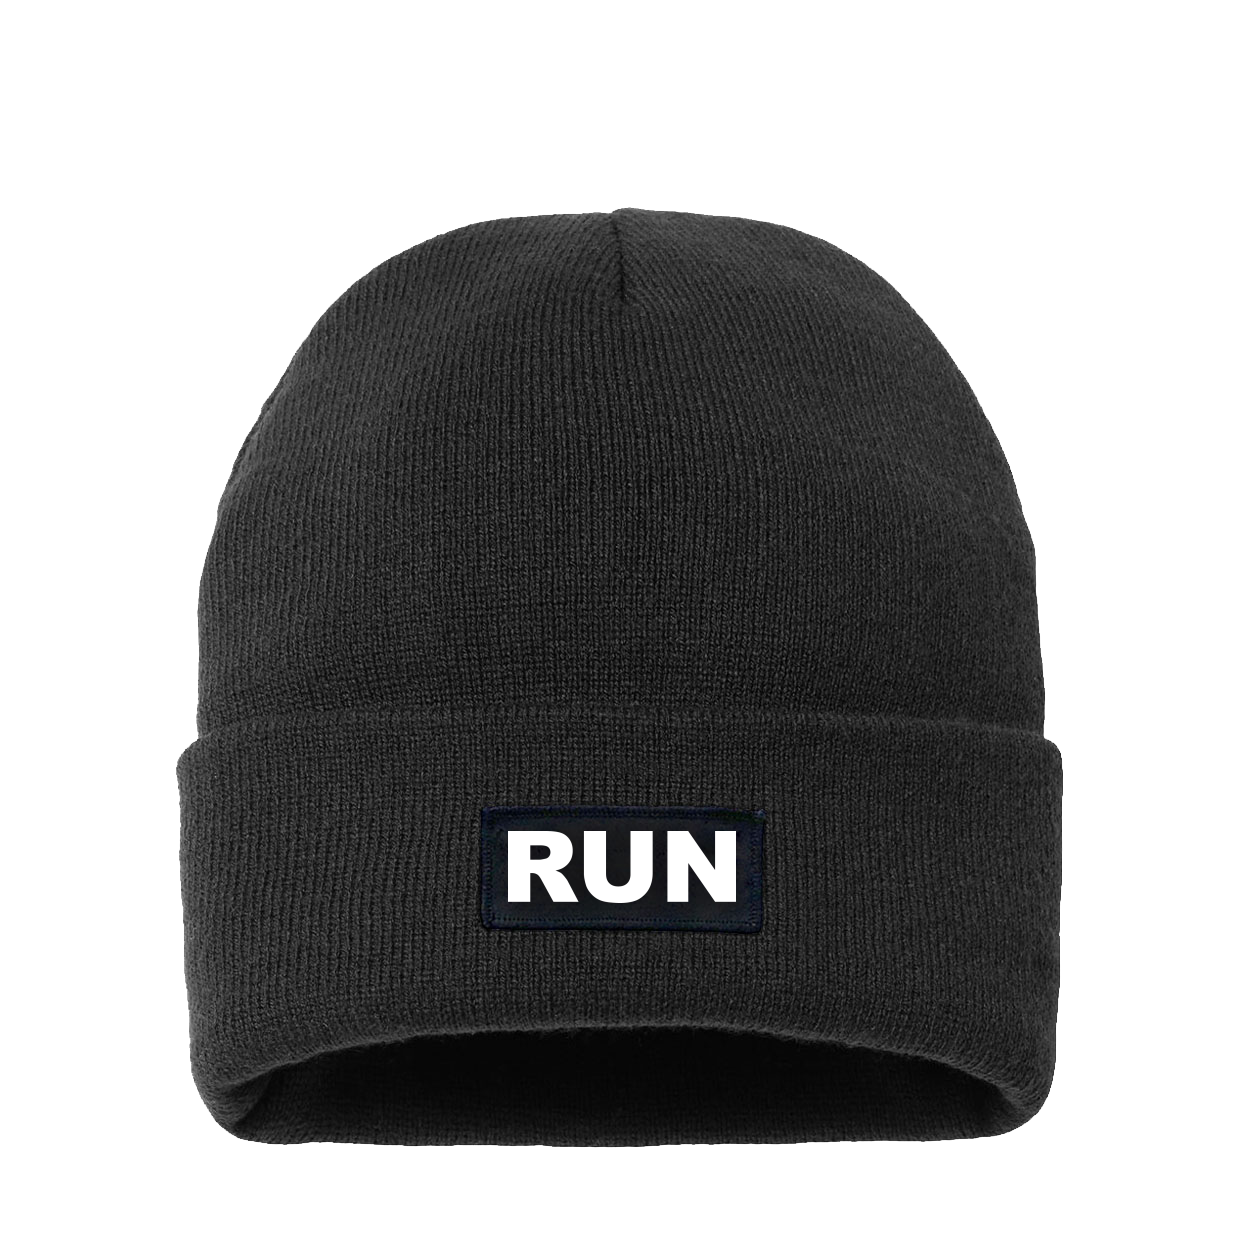 Run Brand Logo Night Out Woven Patch Night Out Sherpa Lined Cuffed Beanie Black